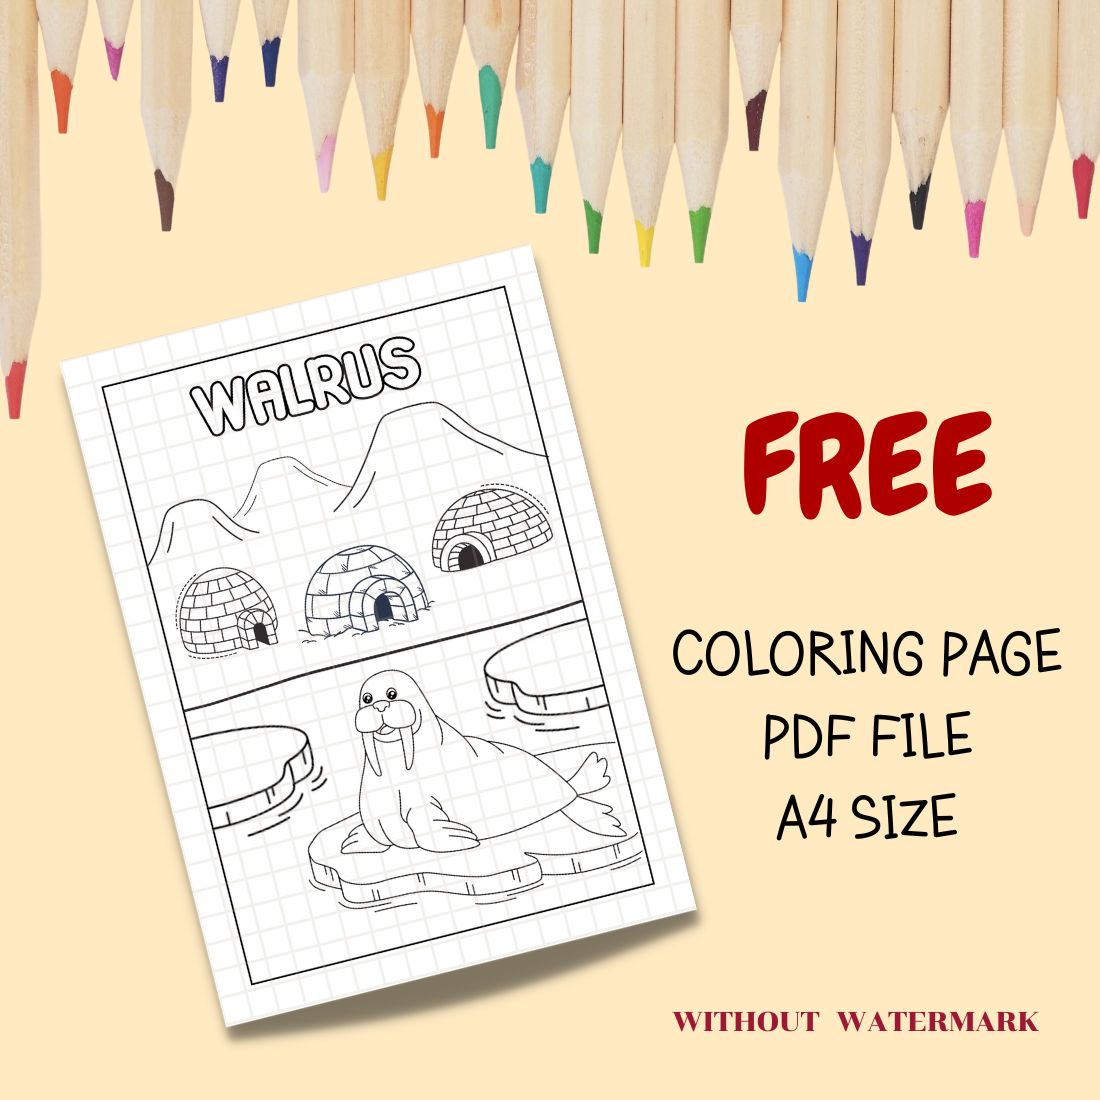 FREE ANIMAL COLORING PAGE cover image.